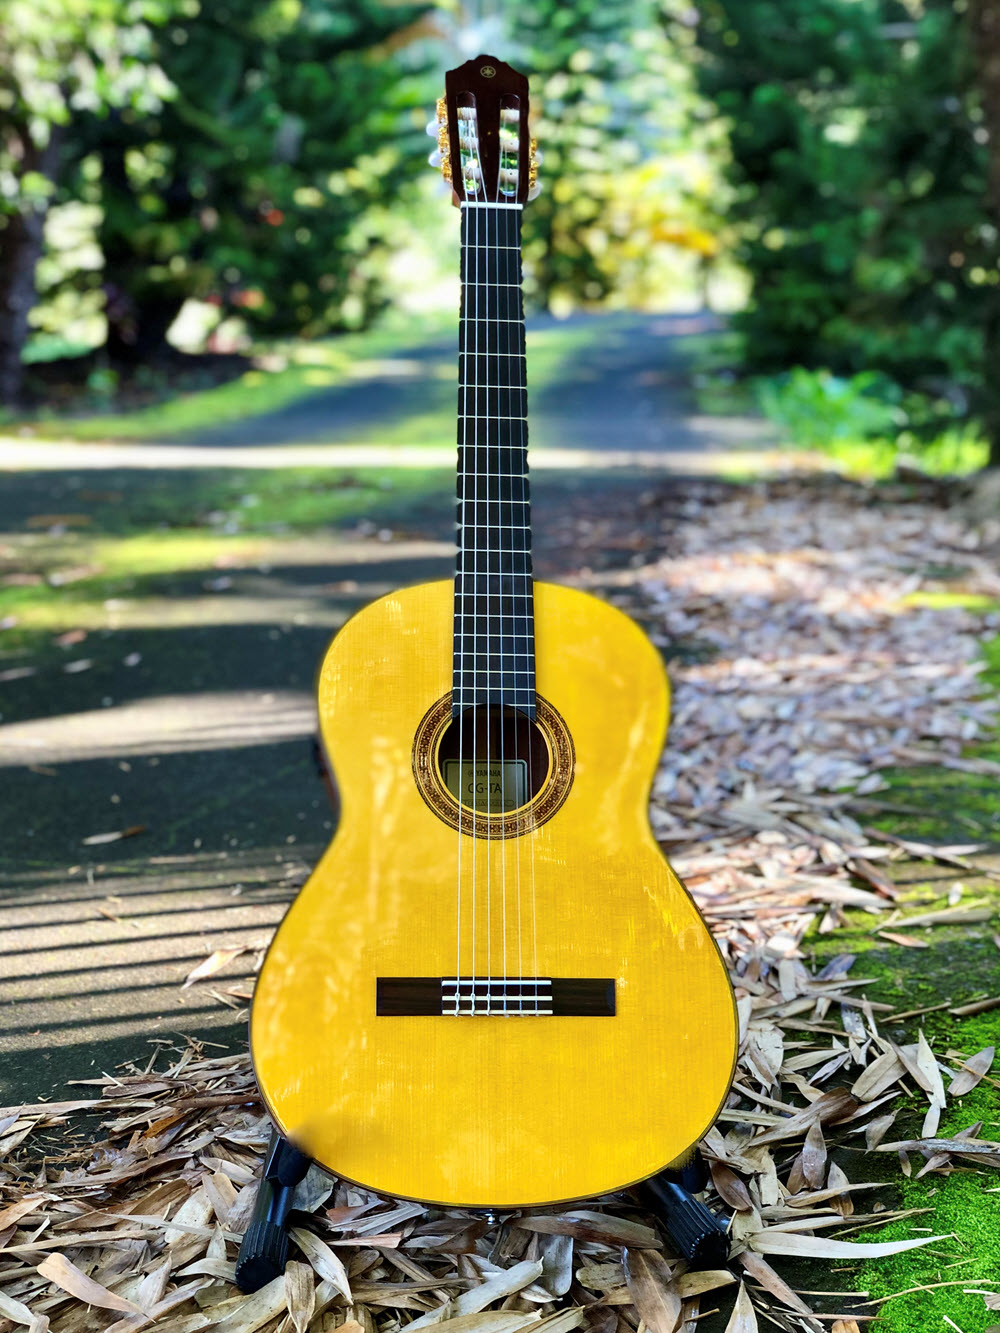 Acoustic guitar leaning against a park bench.